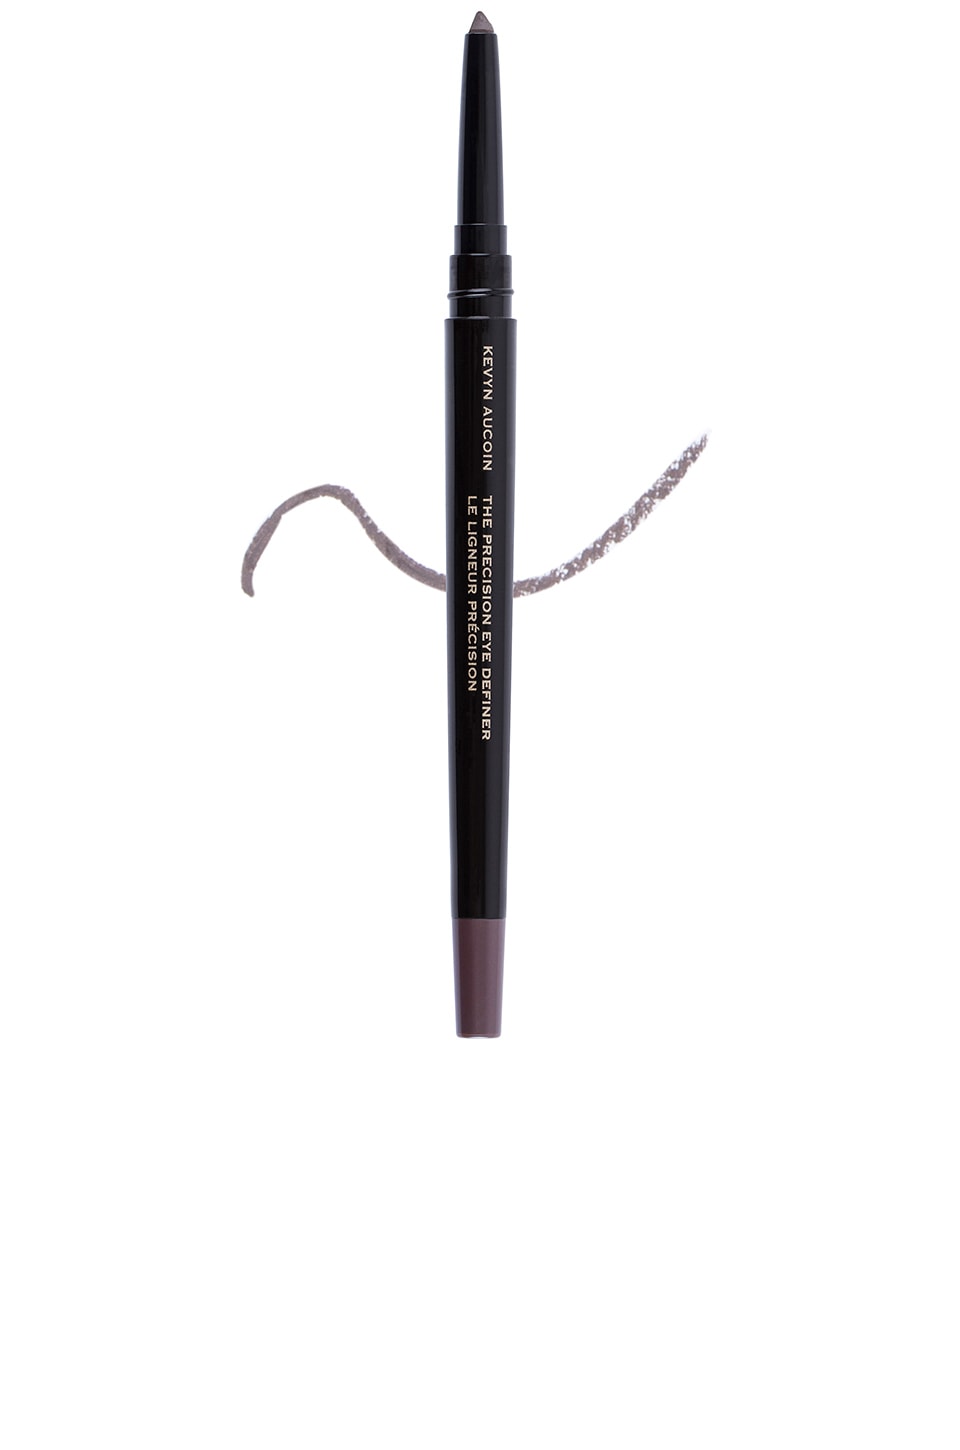 Kevyn Aucoin The Precision Eye Definer In Ironclad Revolve 